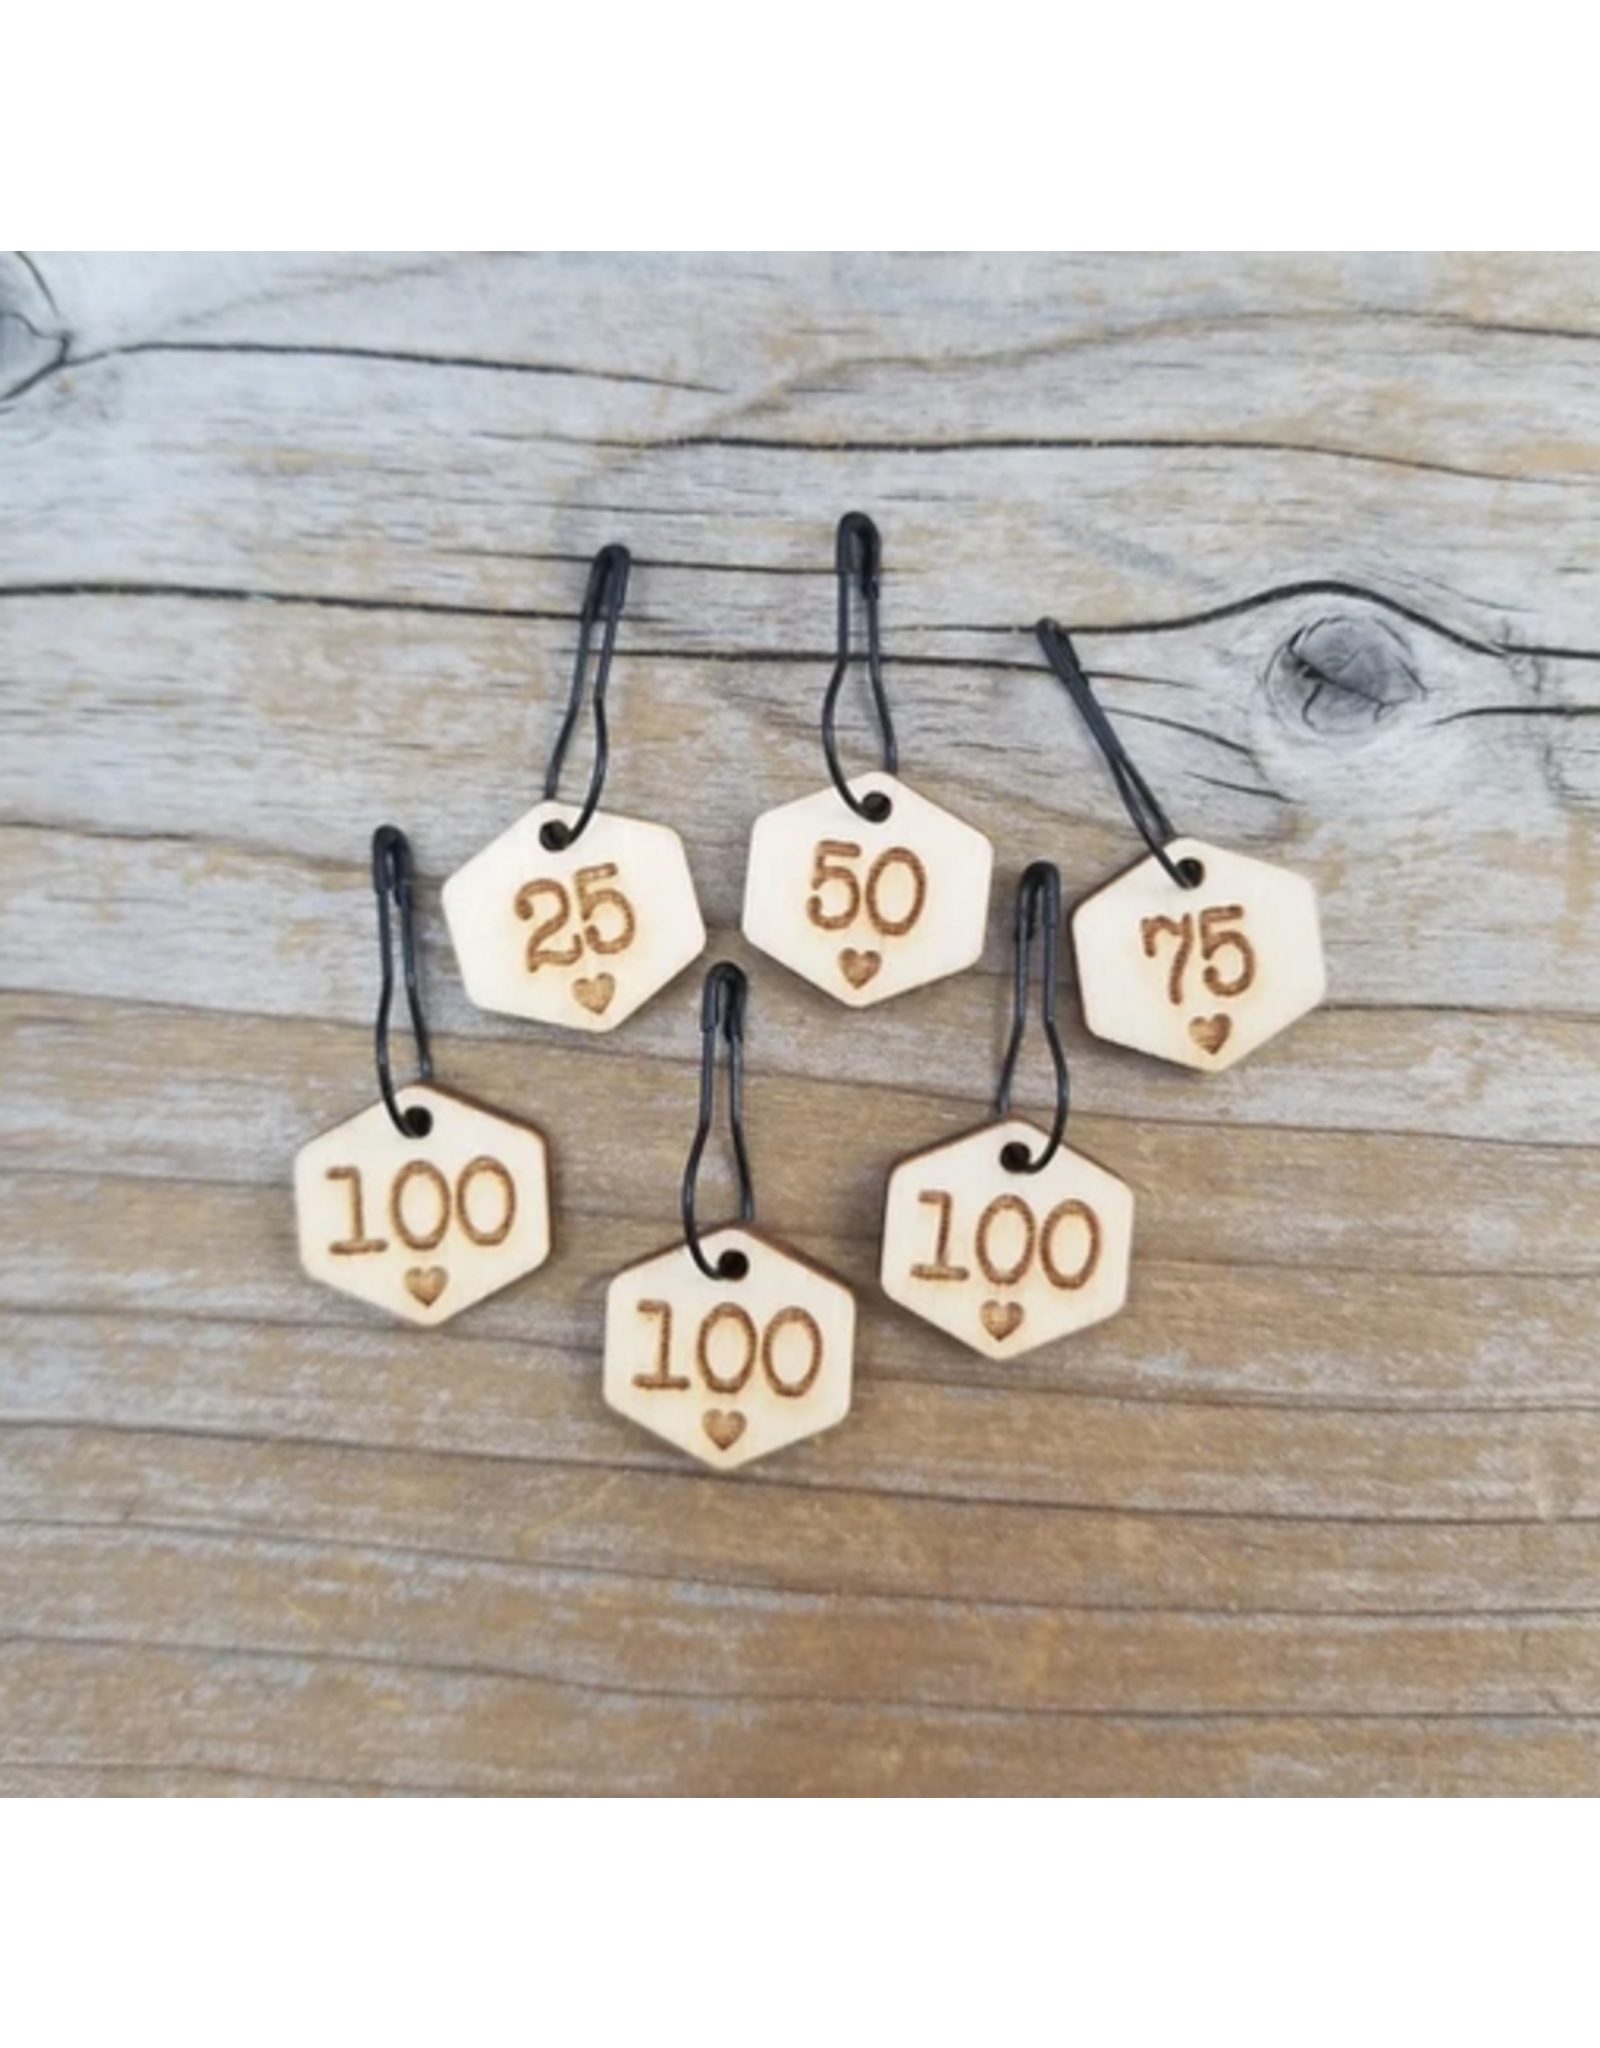 Cast On Counting Numbers set of ring stitch markers by Katrinkles